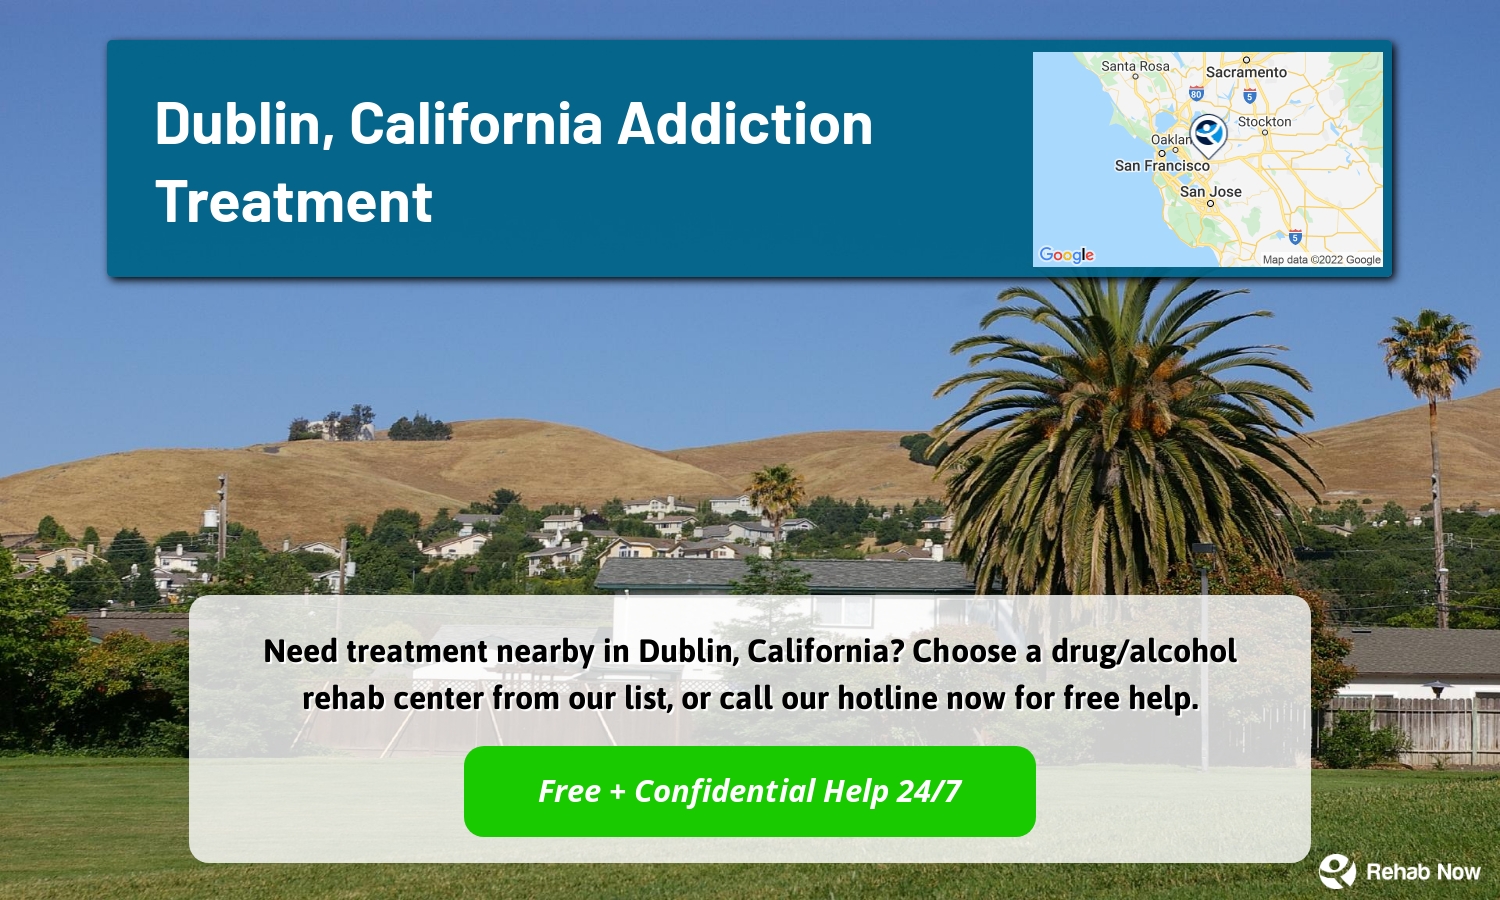 Need treatment nearby in Dublin, California? Choose a drug/alcohol rehab center from our list, or call our hotline now for free help.